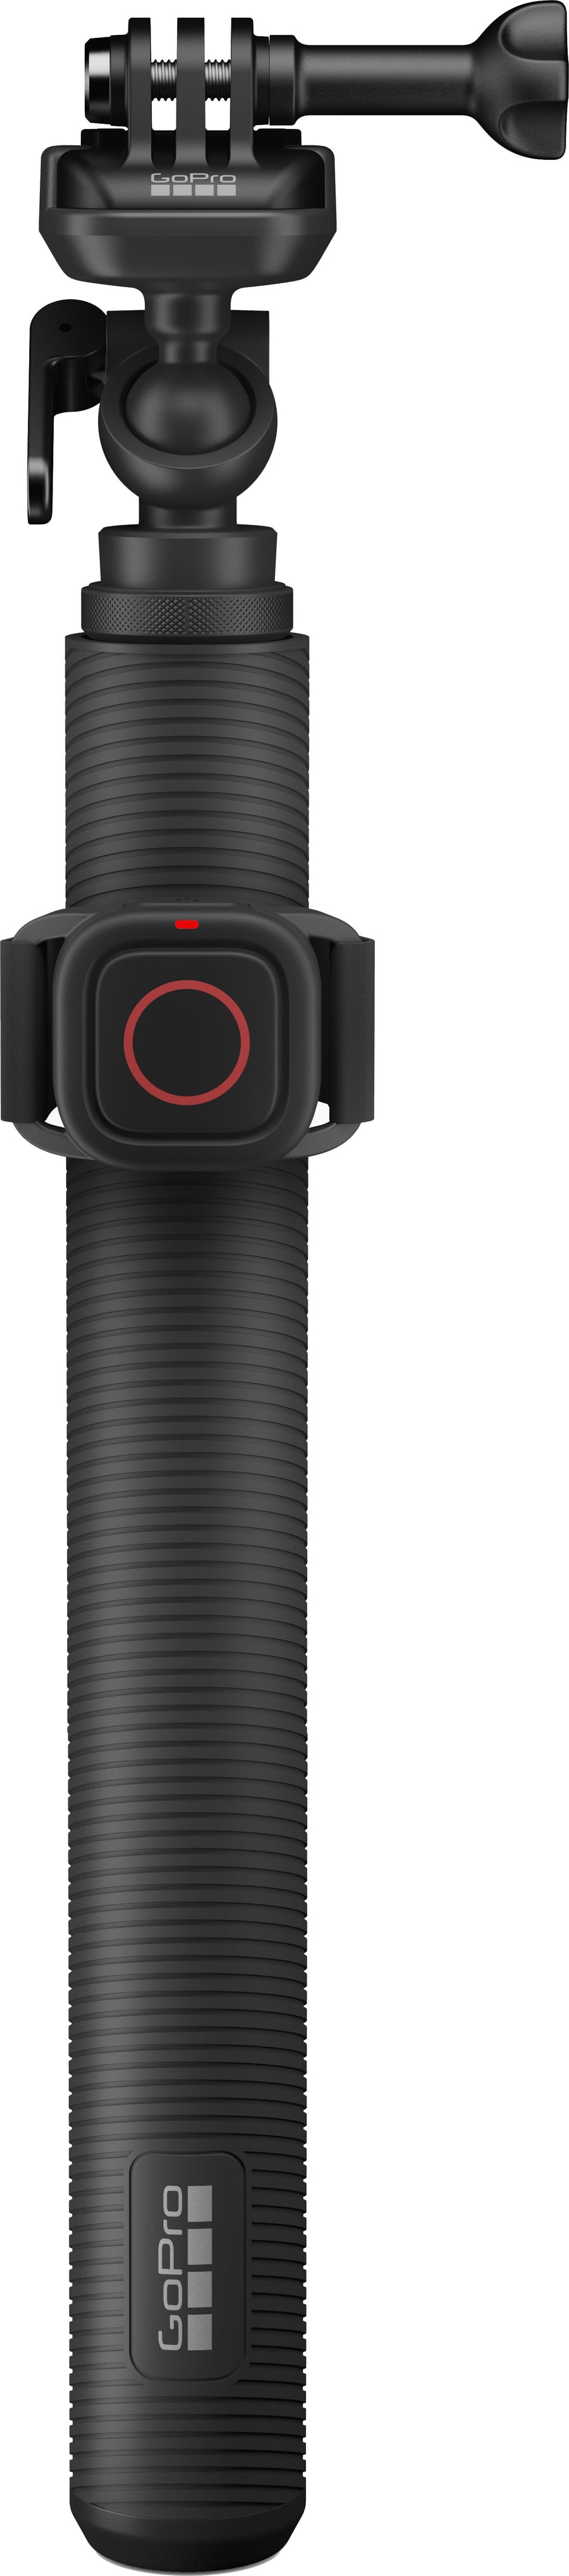 GoPro - Extension Pole and Waterproof Shutter Remote - Black_0